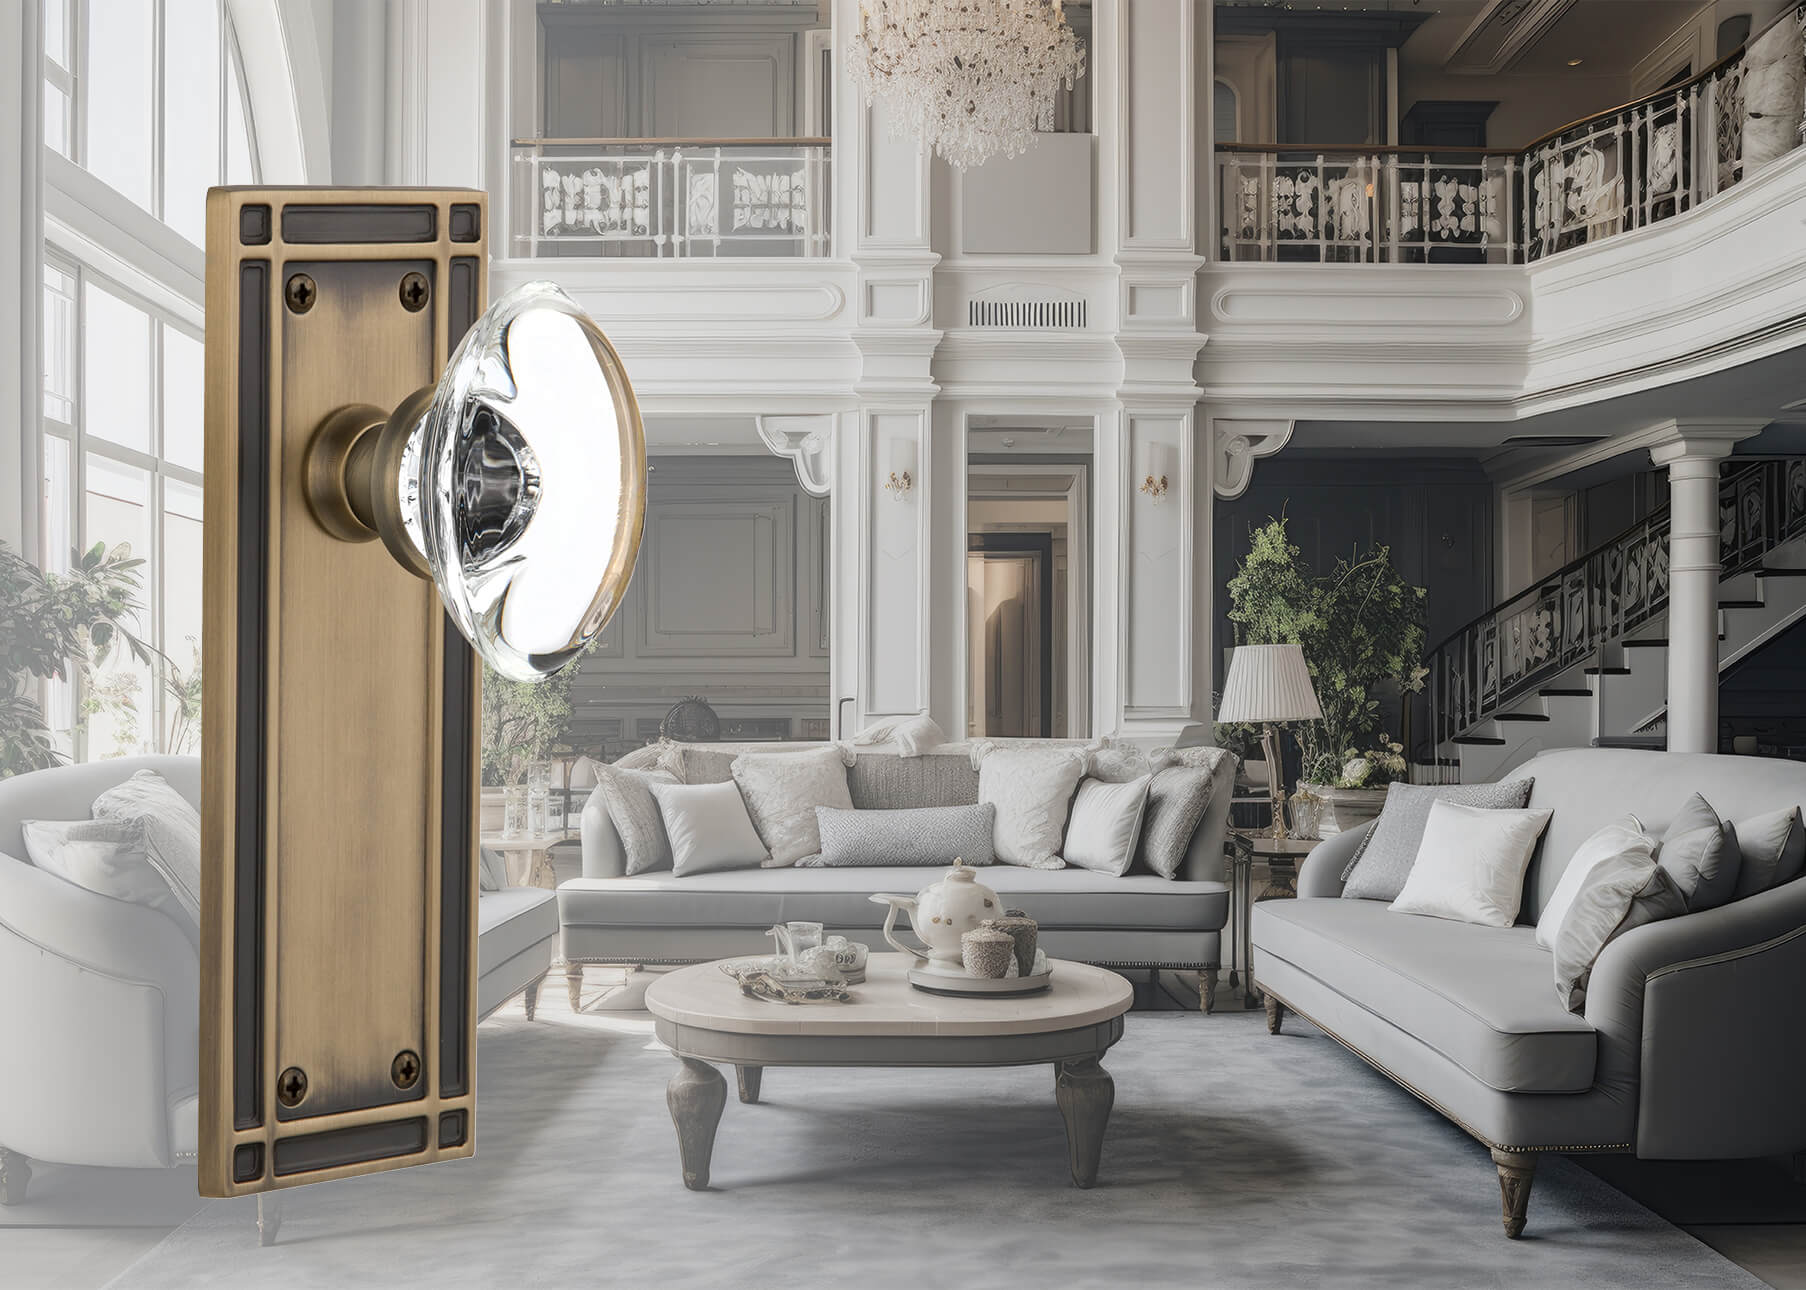 A sophisticated neutral colored living room with high ceilings with a Nostalgic Warehouse Mission Long Plate with Oval Clear Crystal Knob in Antique Brass laid over the top of the image on the left.